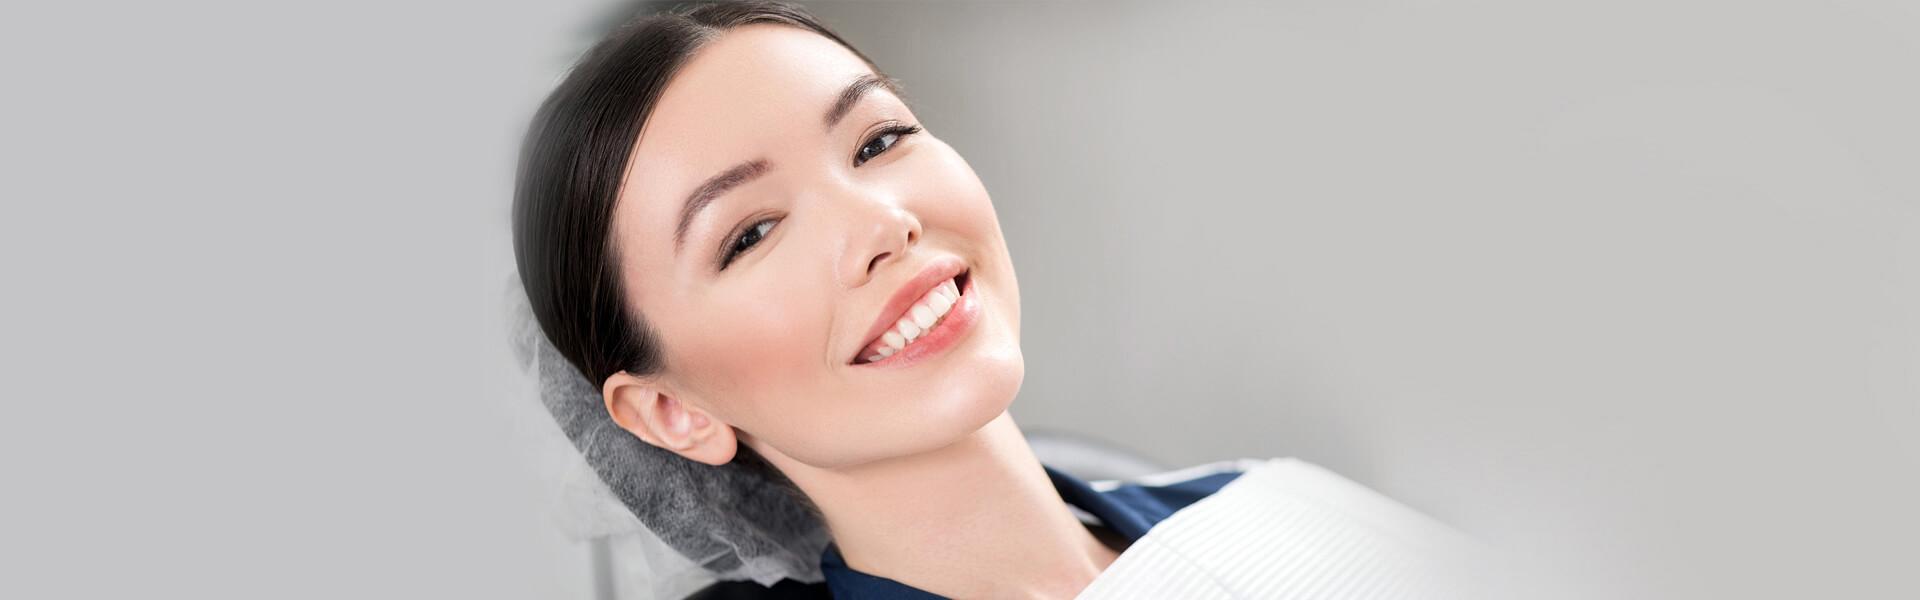 Eliminate the Problem Caused by Tooth Loss with Dental Implants